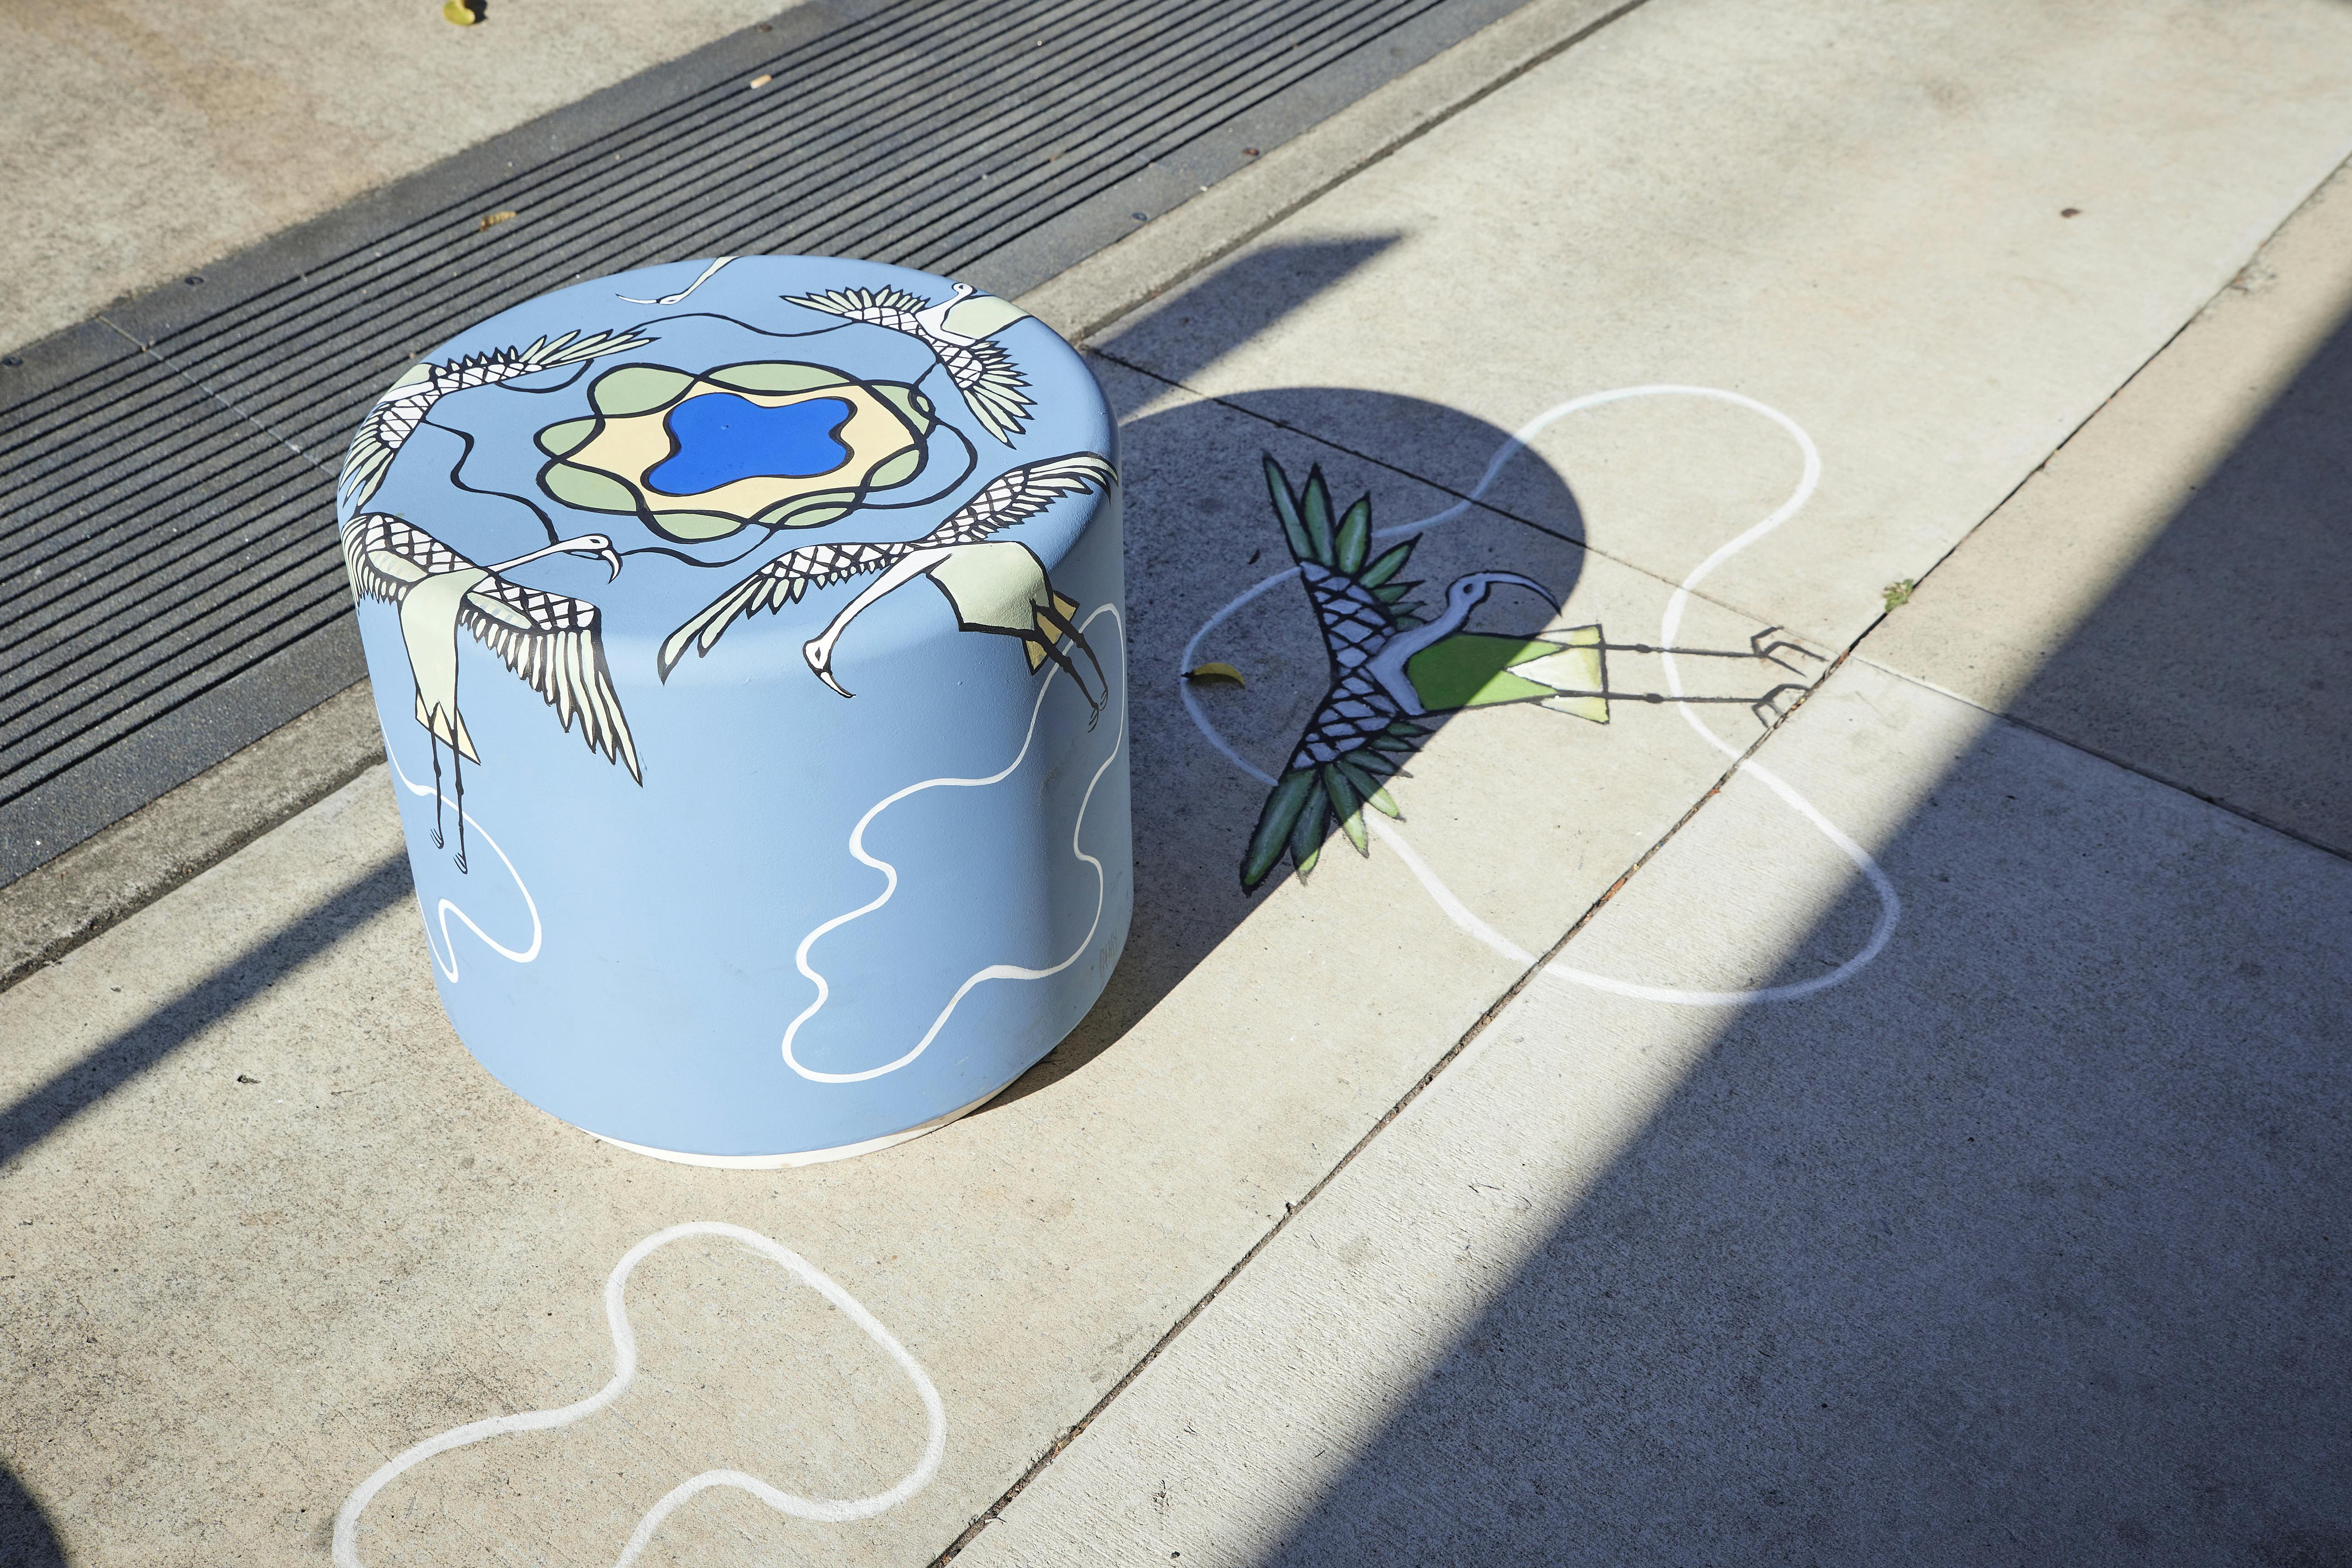 Phillip Hay's air themed artwork complimented with chalk art